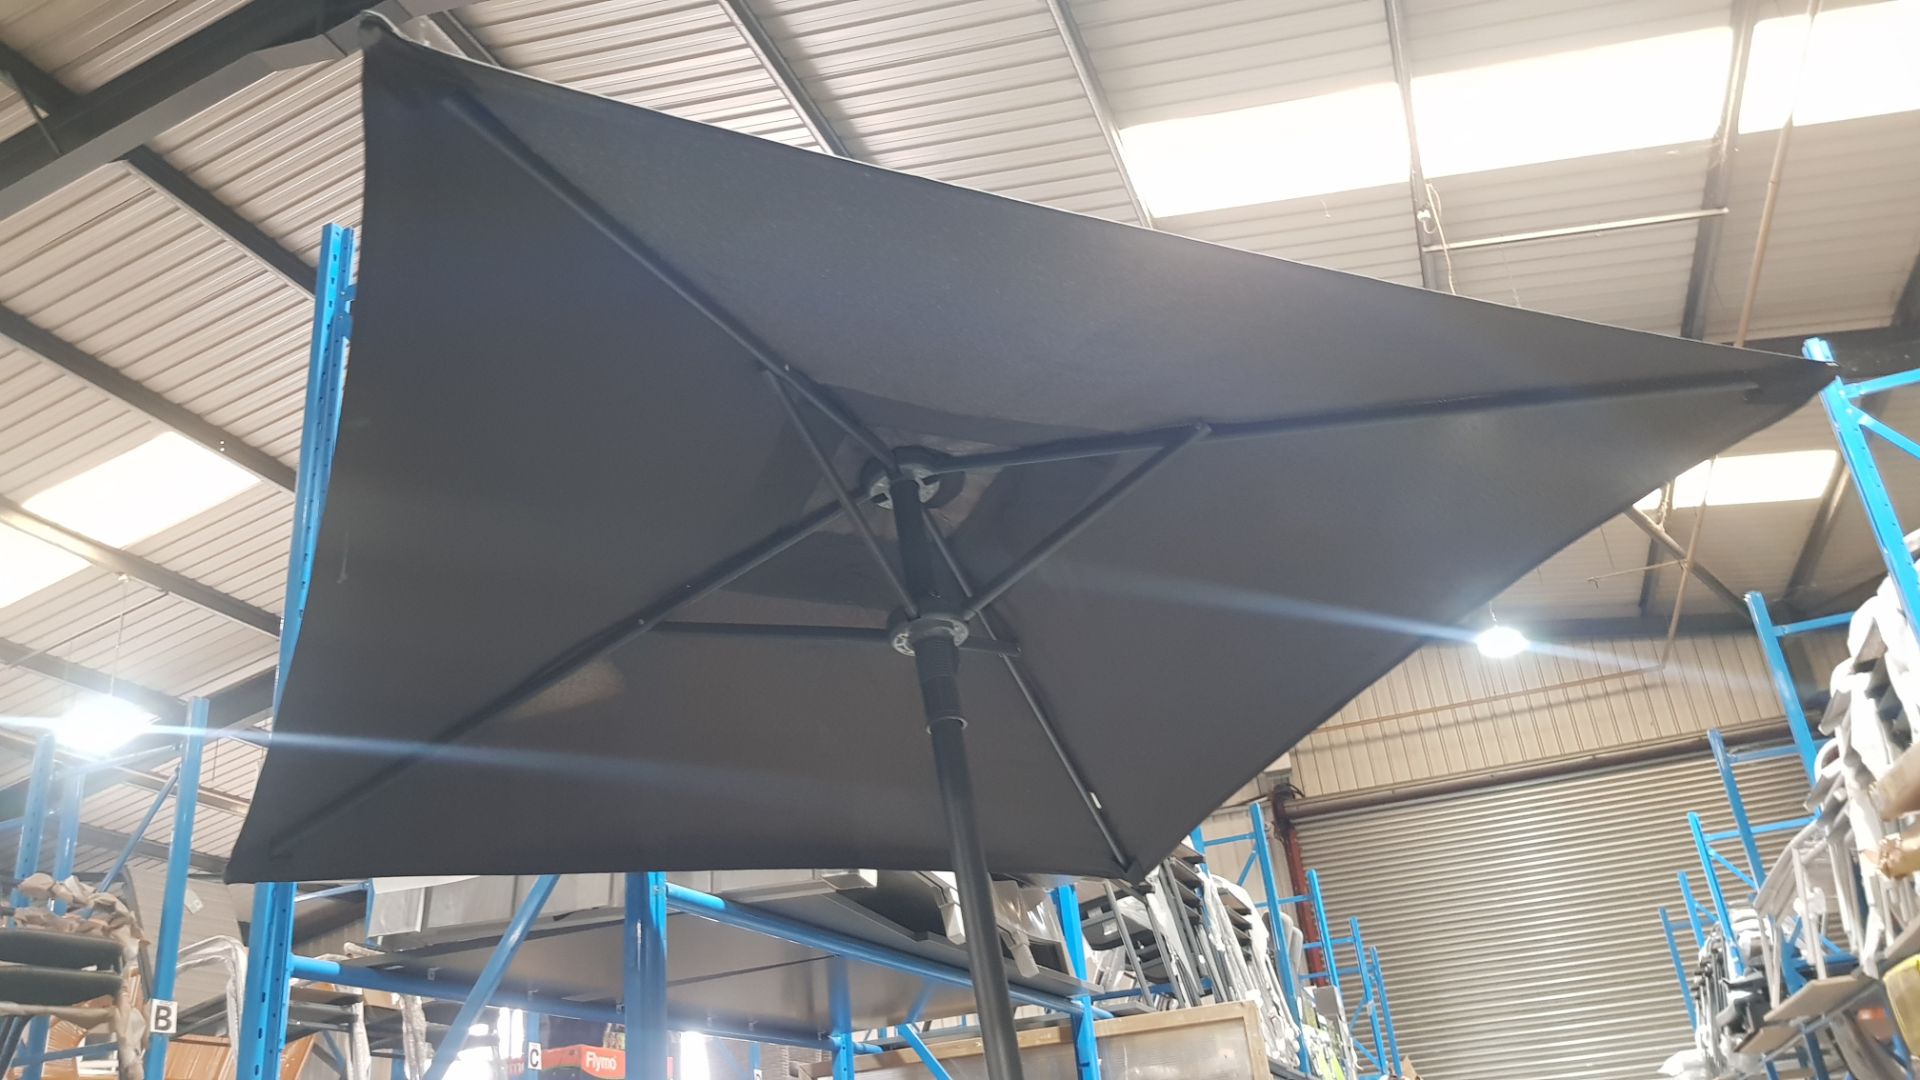 (R7G) 1x Andorra Dark Grey Square Parasol. Packaged Dimensions (110x 20x 10cm). Extended Dimensions - Image 5 of 7